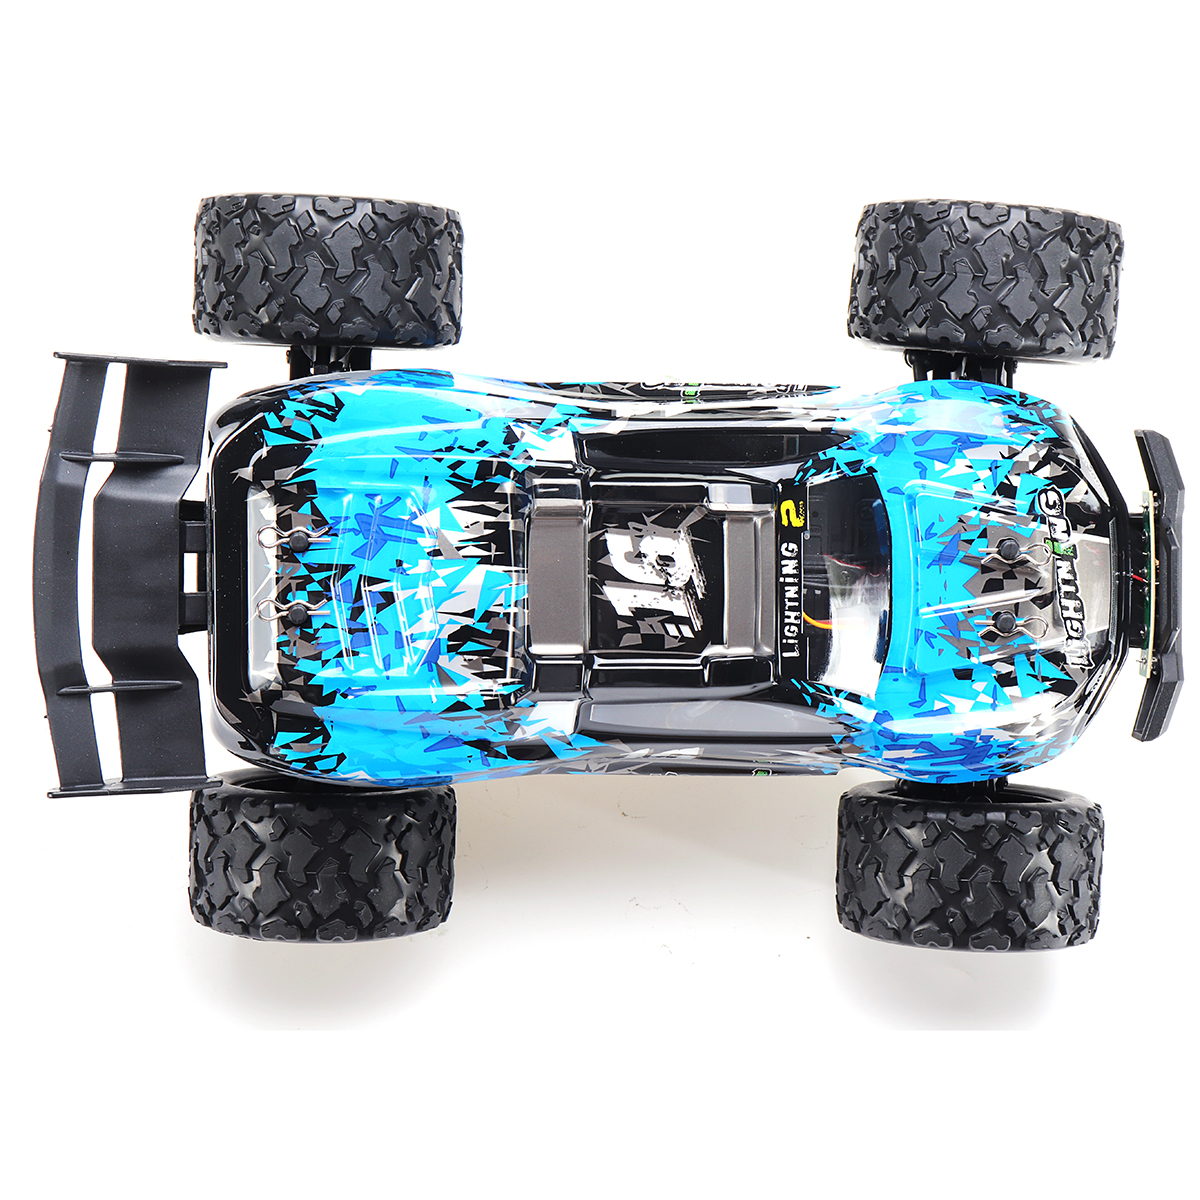 HS 18421 18422 18423 1/18 2.4G Alloy Brushless Off Road High Speed RC Car Vehicle Models Full Proportional Control - Photo: 7